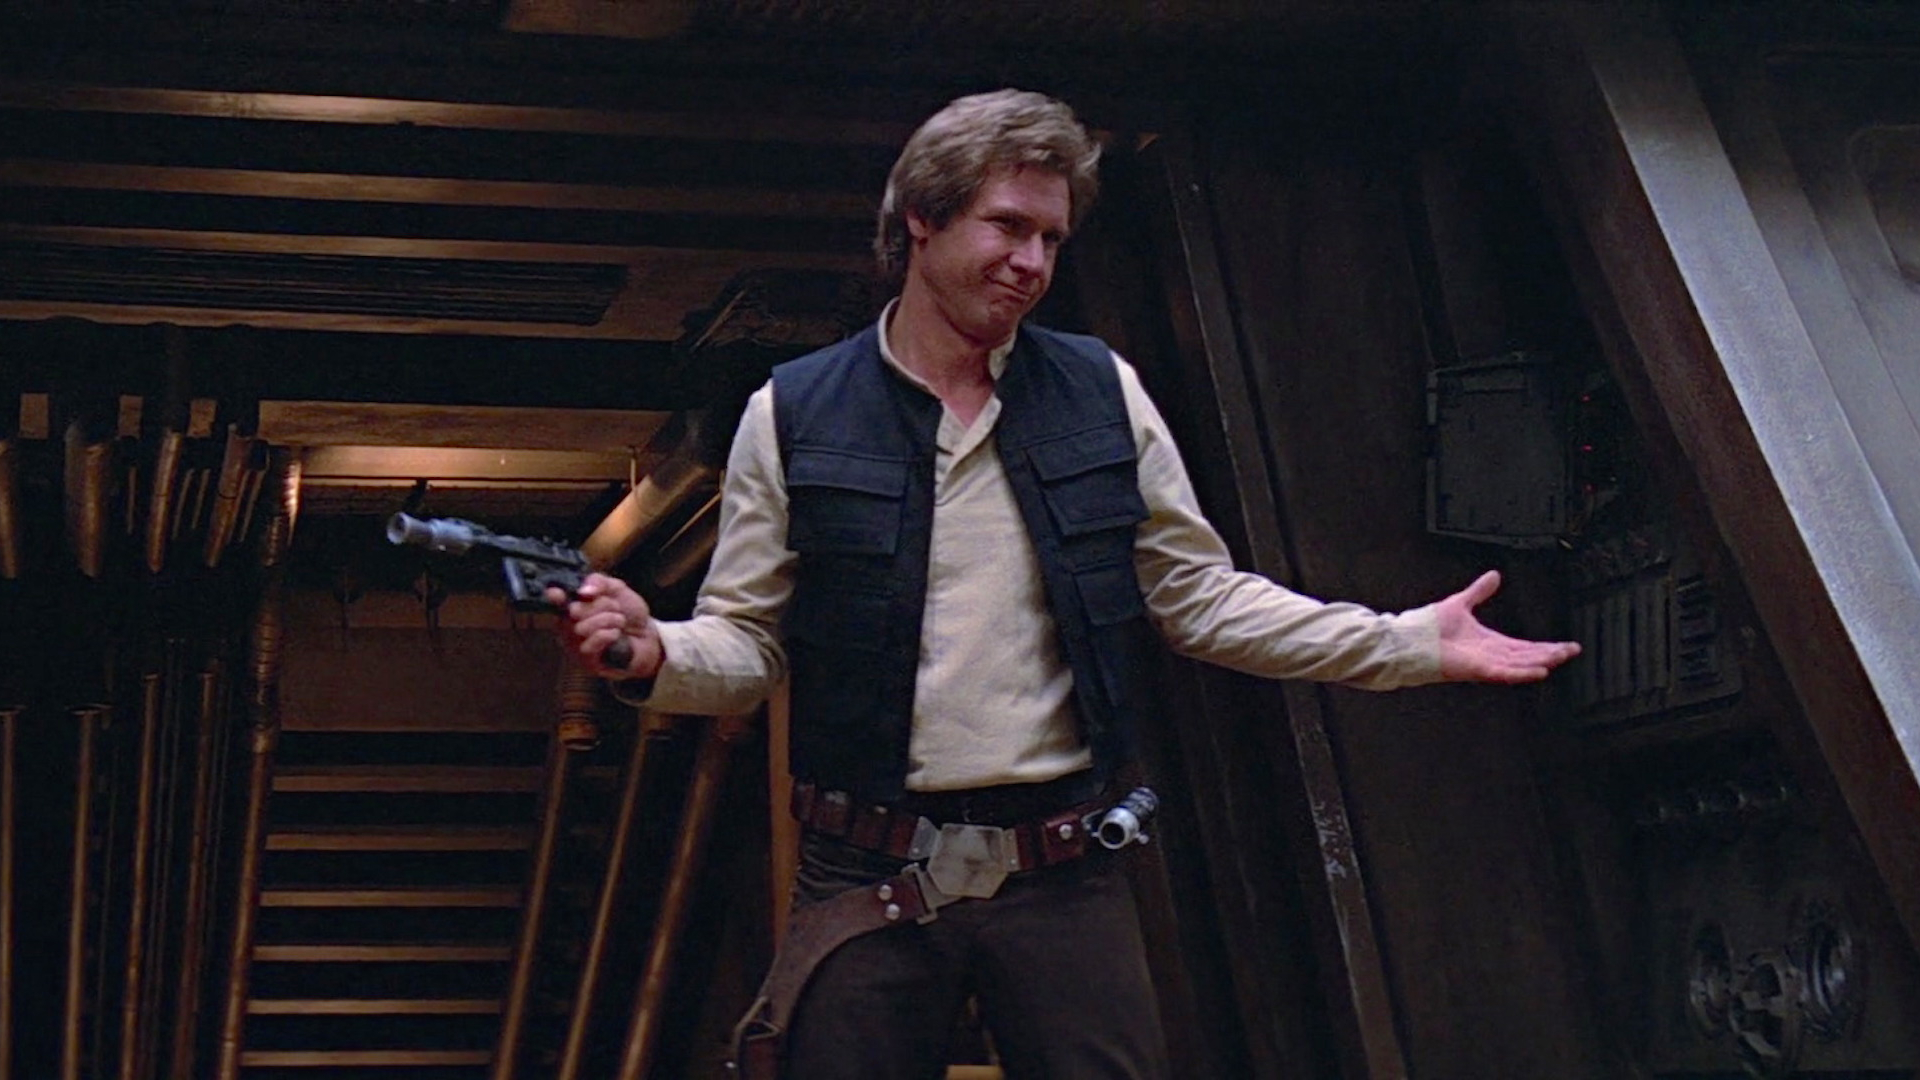 We have no trailers yet, so here's Han Solo shrugging in Return of the Jedi.